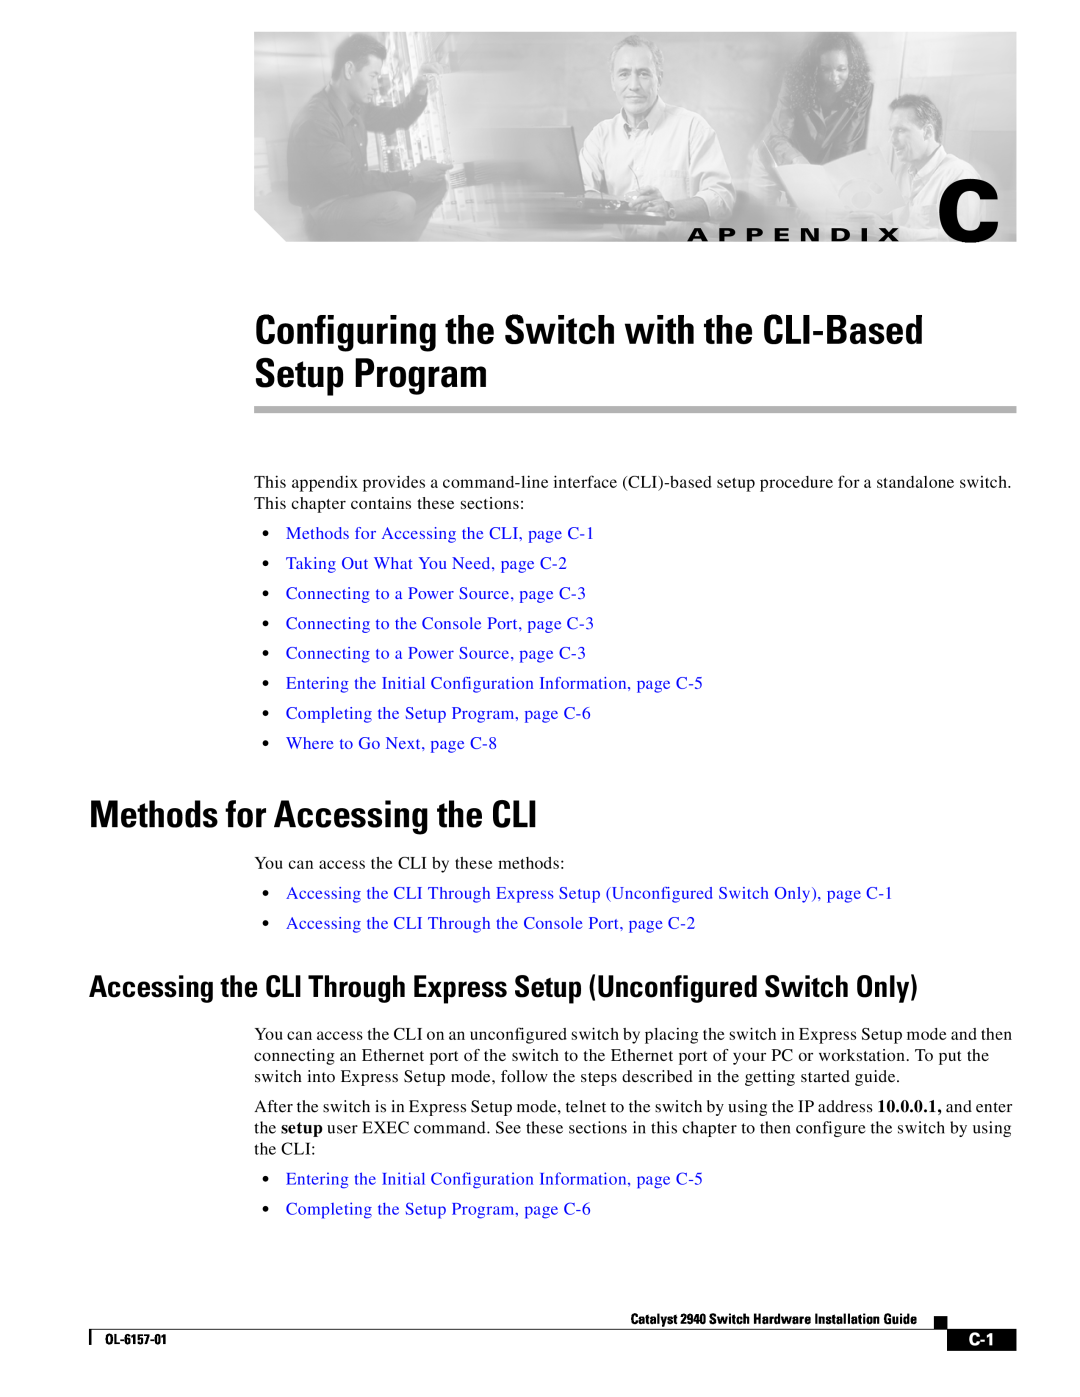 Cisco Systems OL-6157-01 manual Configuring the Switch with the CLI-Based Setup Program, Methods for Accessing the CLI 